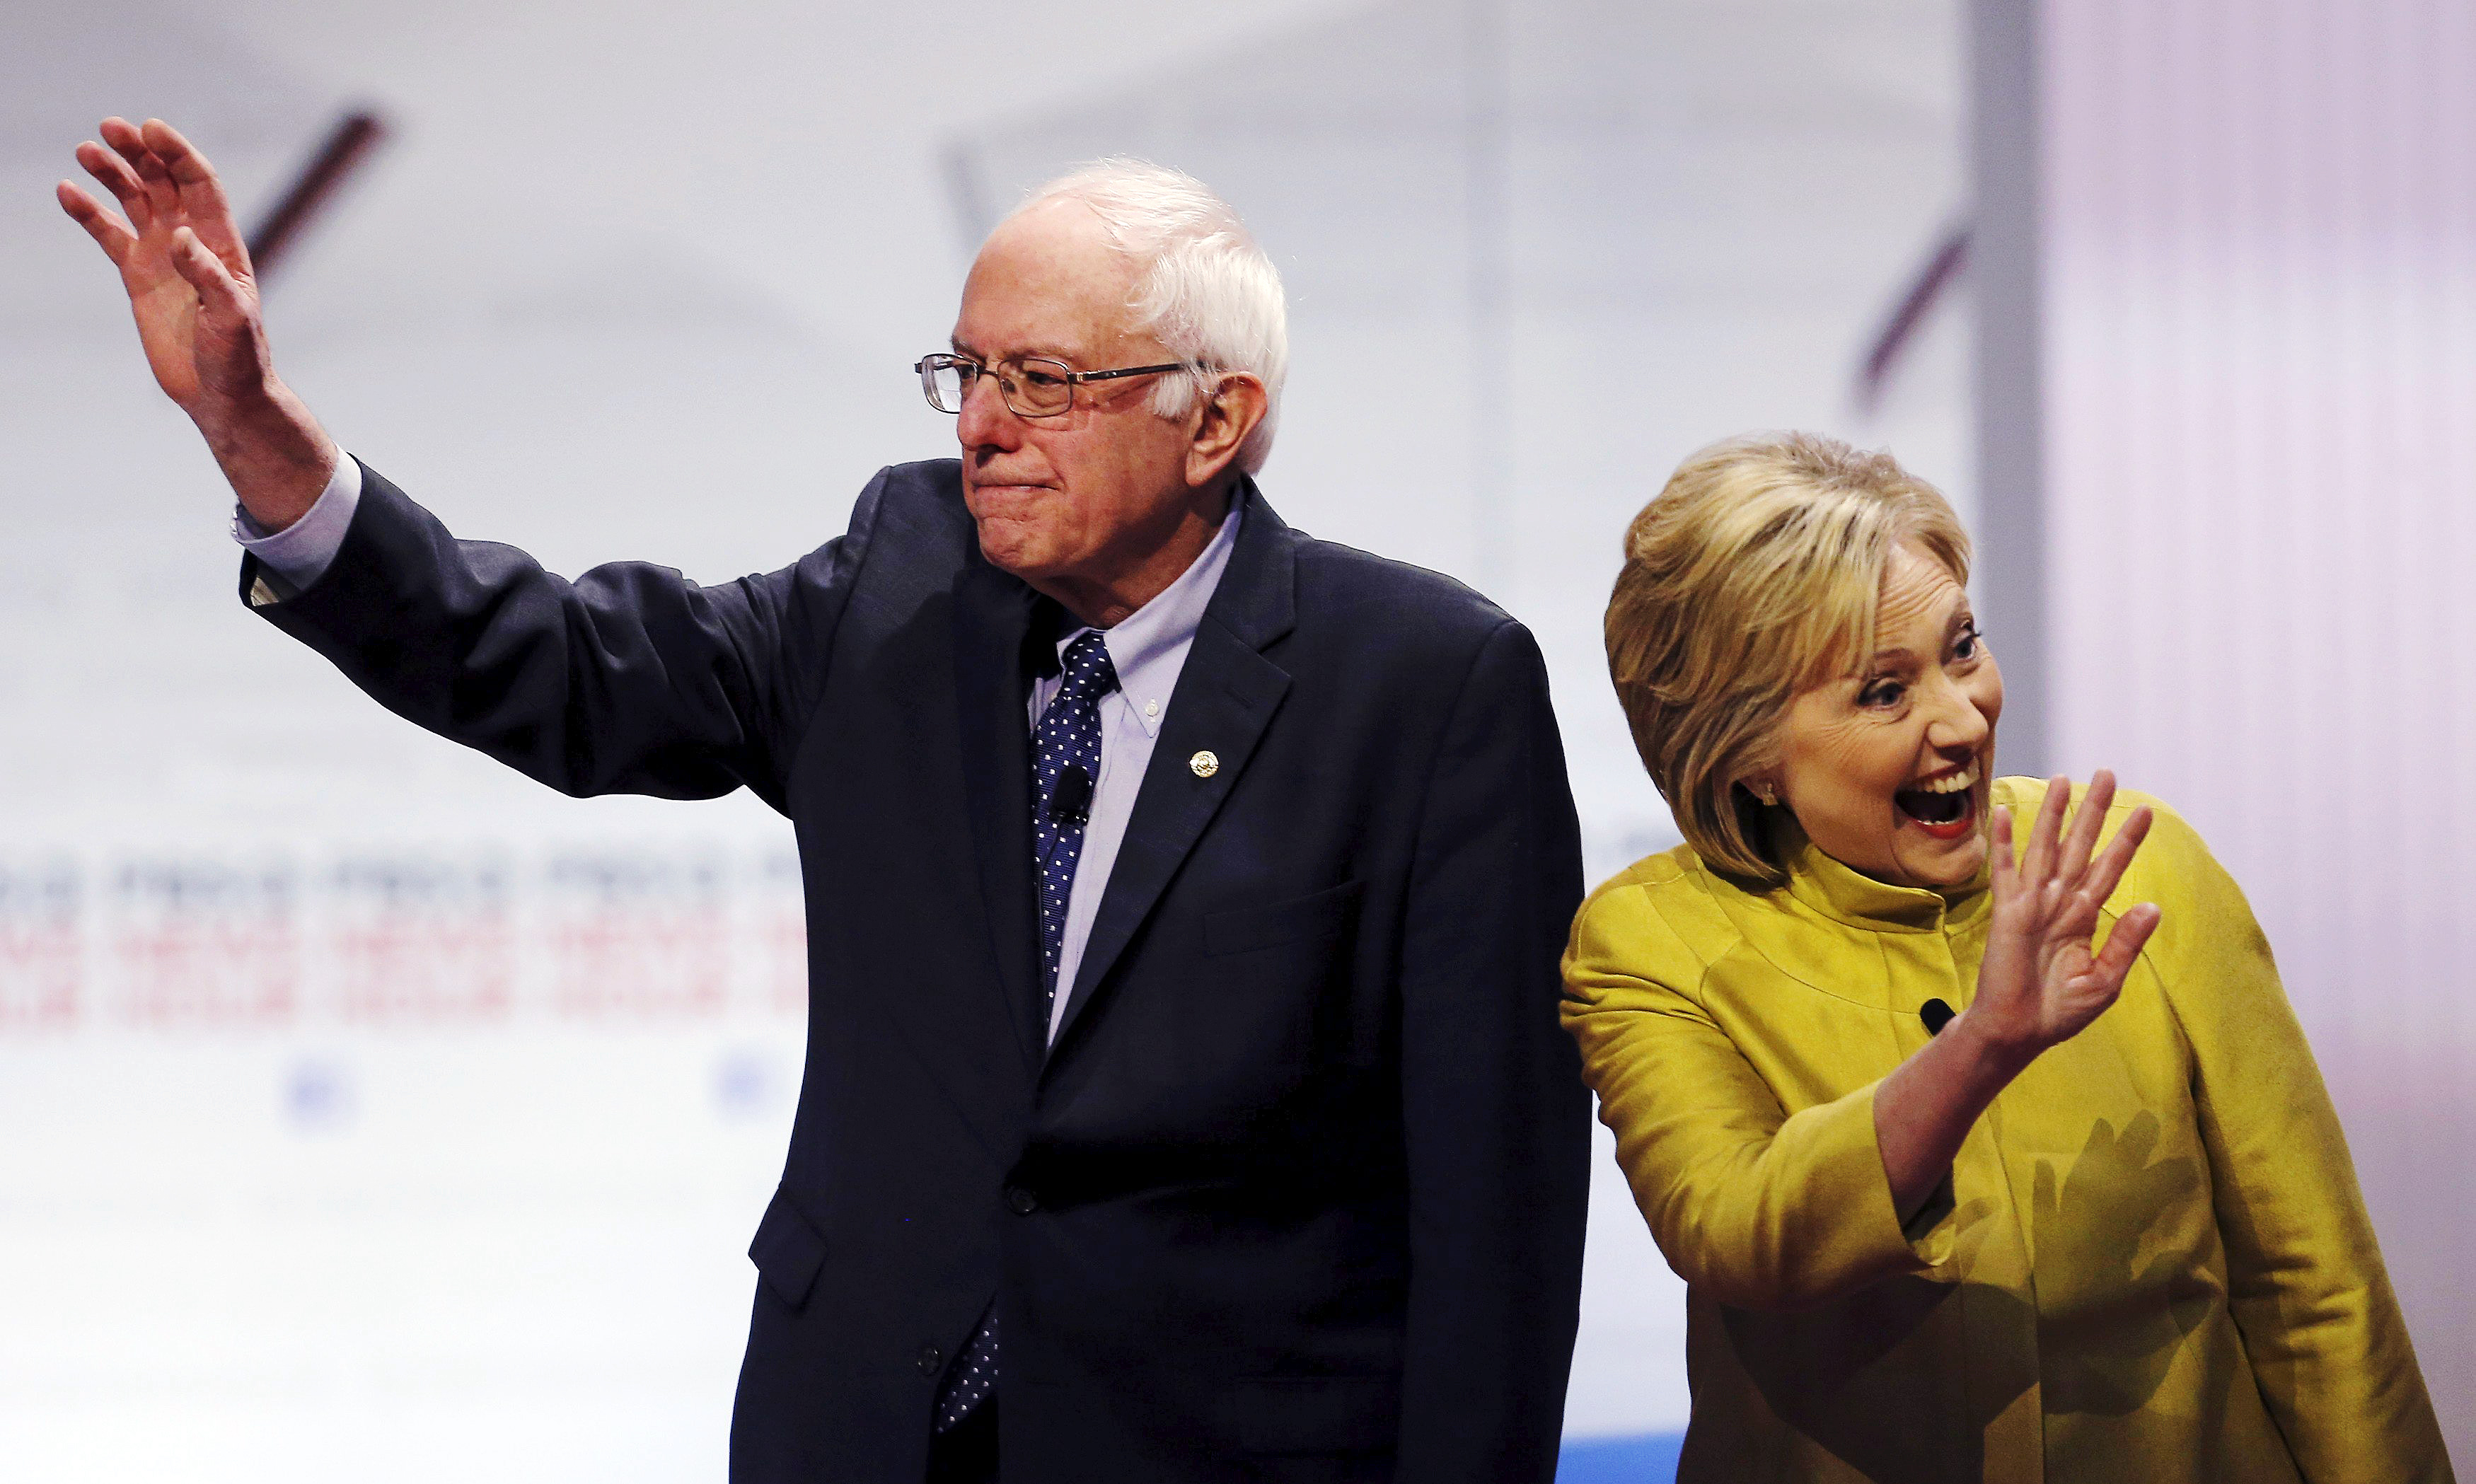 Democratic. presidential candidates Senator Bernie Sanders and former Secretary of State Hillary Clinton on stage at a debate in Milwaukee on Feb. 11, 2016. (Jim Young—Reuters)